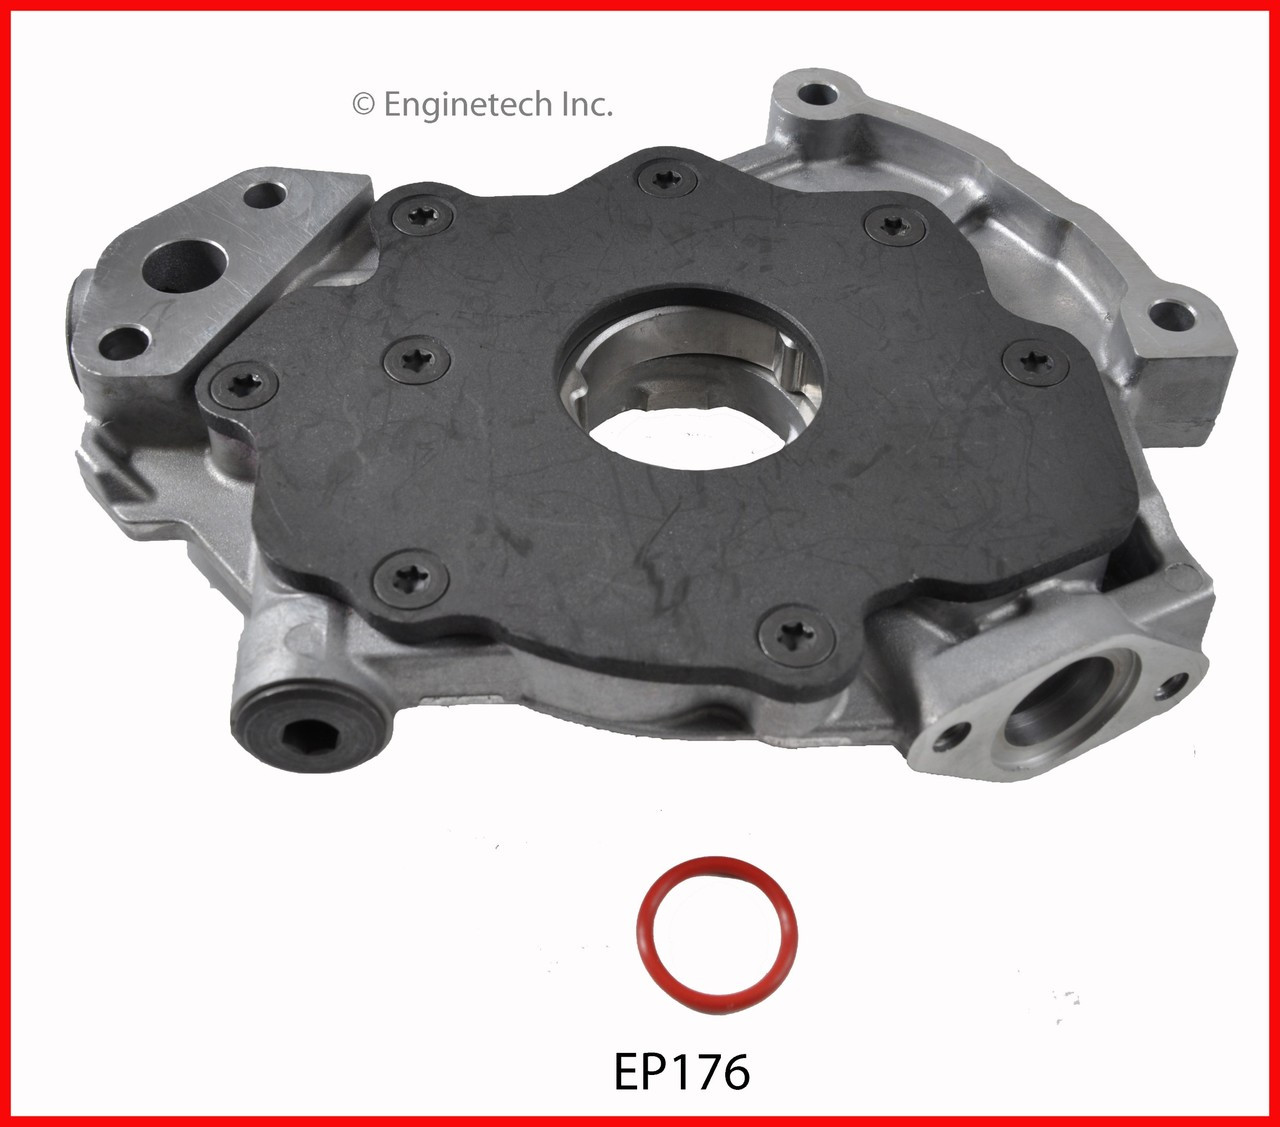 Oil Pump - 2000 Ford Expedition 4.6L (EP176.K121)